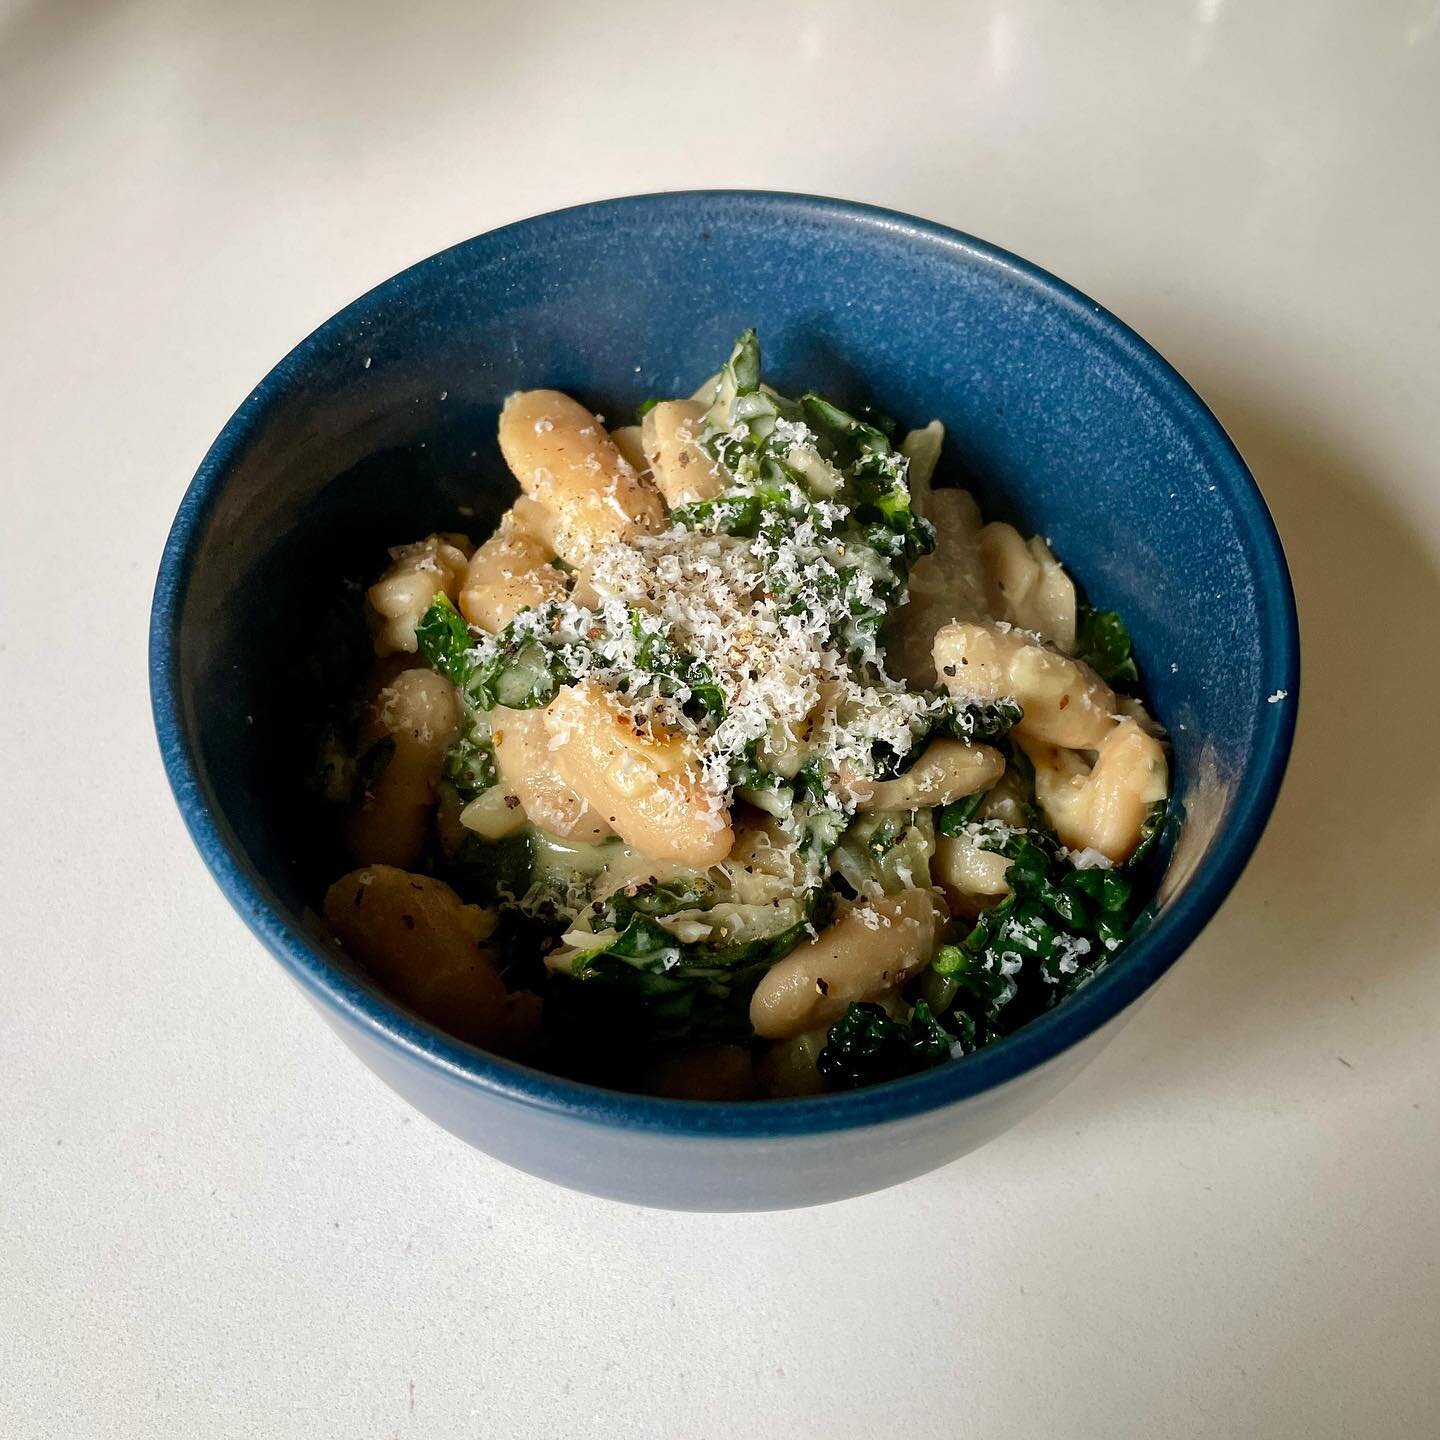 last night&rsquo;s dinner (not very gorgeous but good for a gloomy day)&mdash; creamy miso butter beans with kale. Ended up topping it with parm, chili flakes and scallion (not pictured)